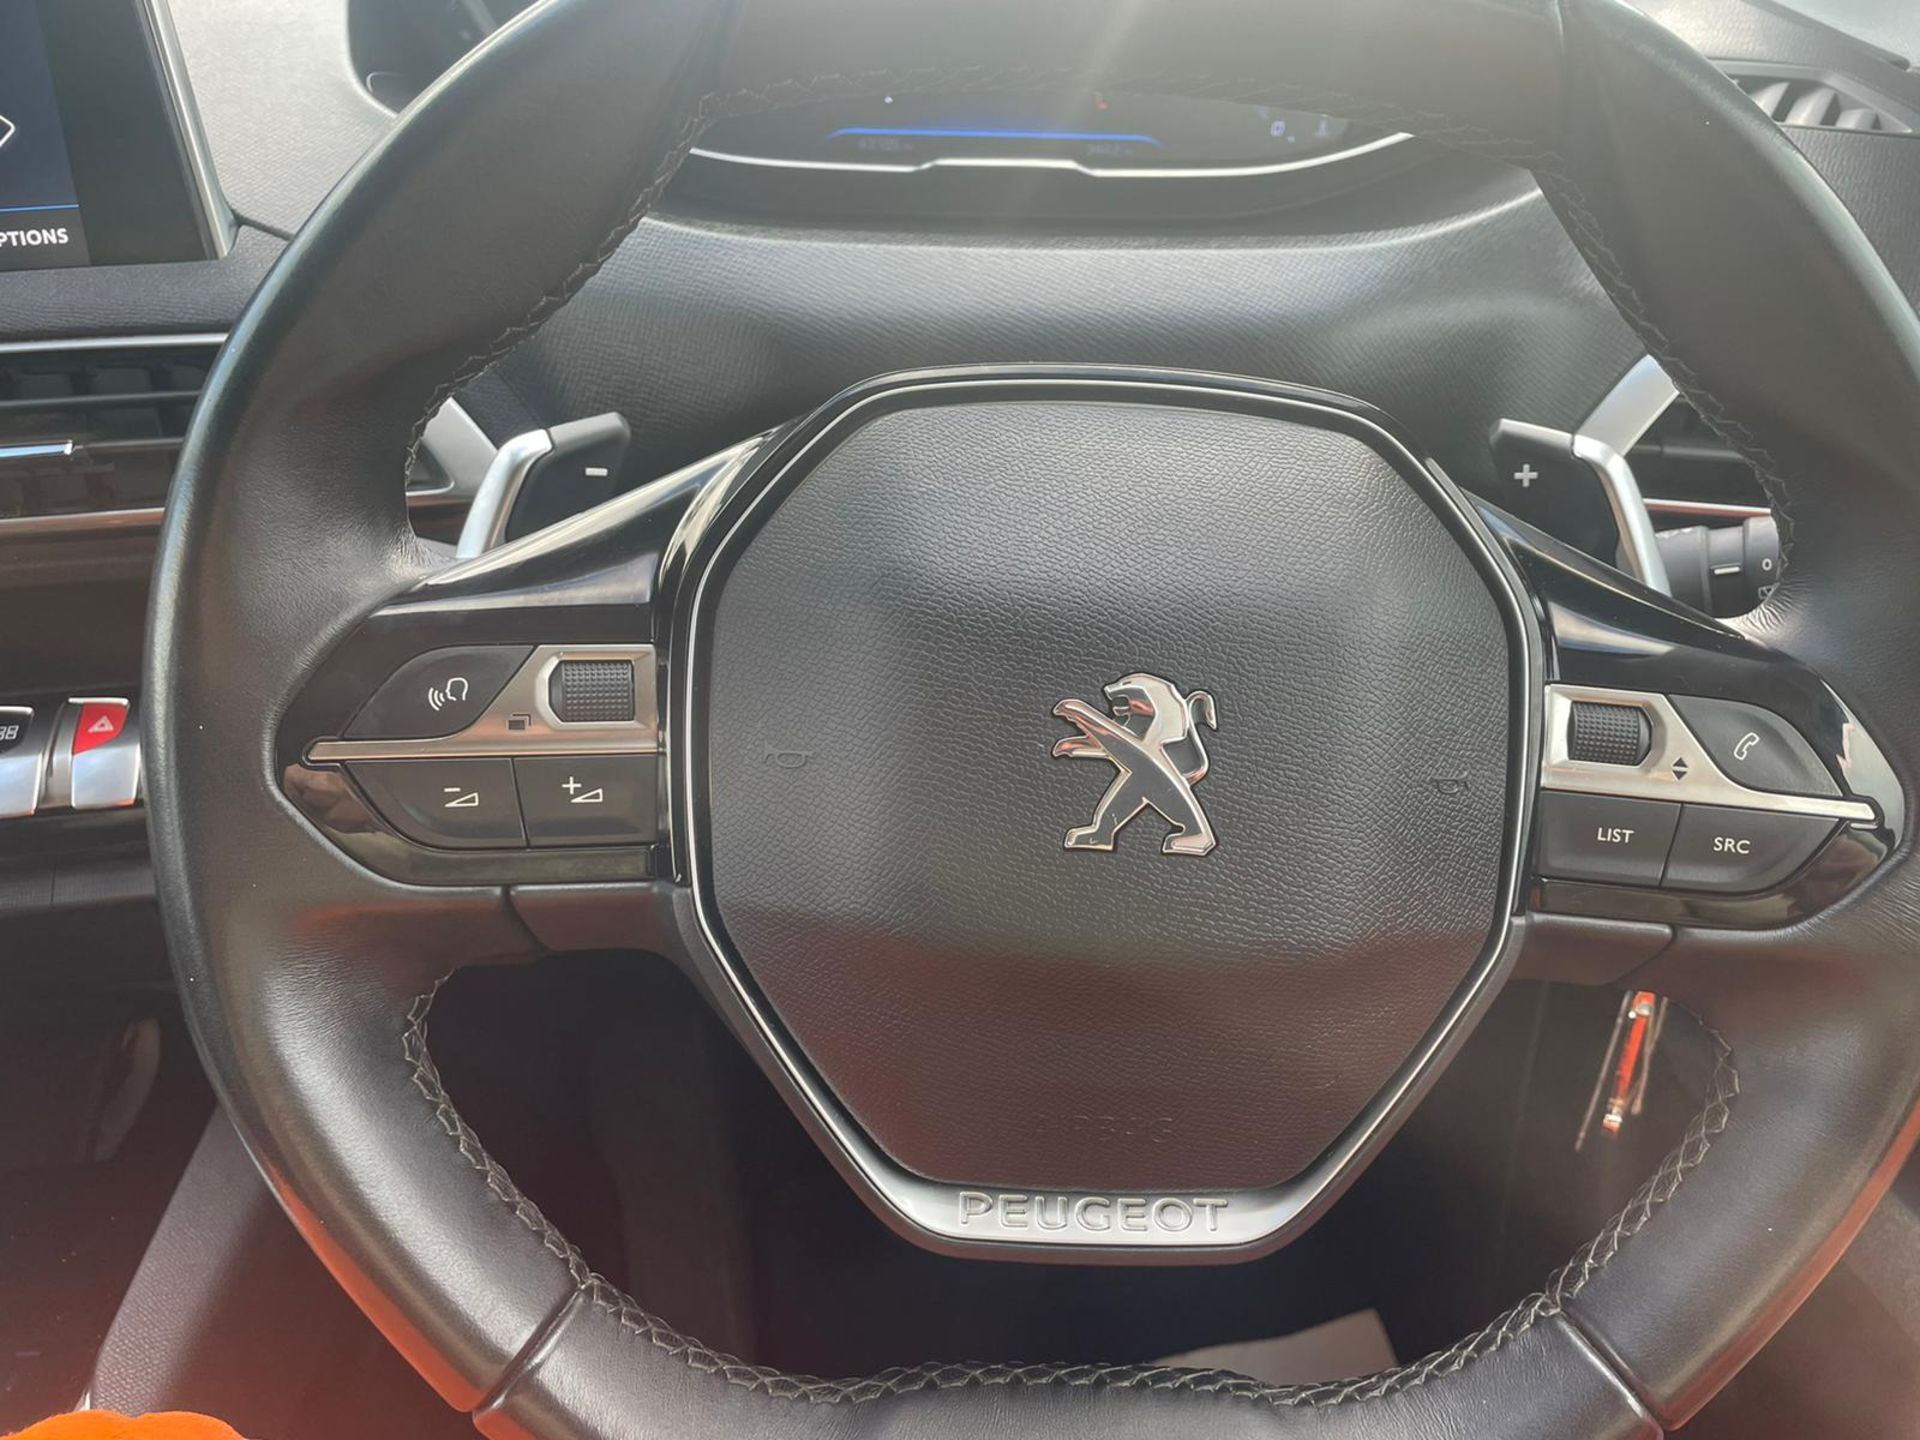 2019/19 REG PEUGEOT 3008 ACTIVE BLUEHDI S/S AUTO 1.5 DIESEL AUTOMATIC, SHOWING 1 FORMER KEEPER - Image 18 of 21